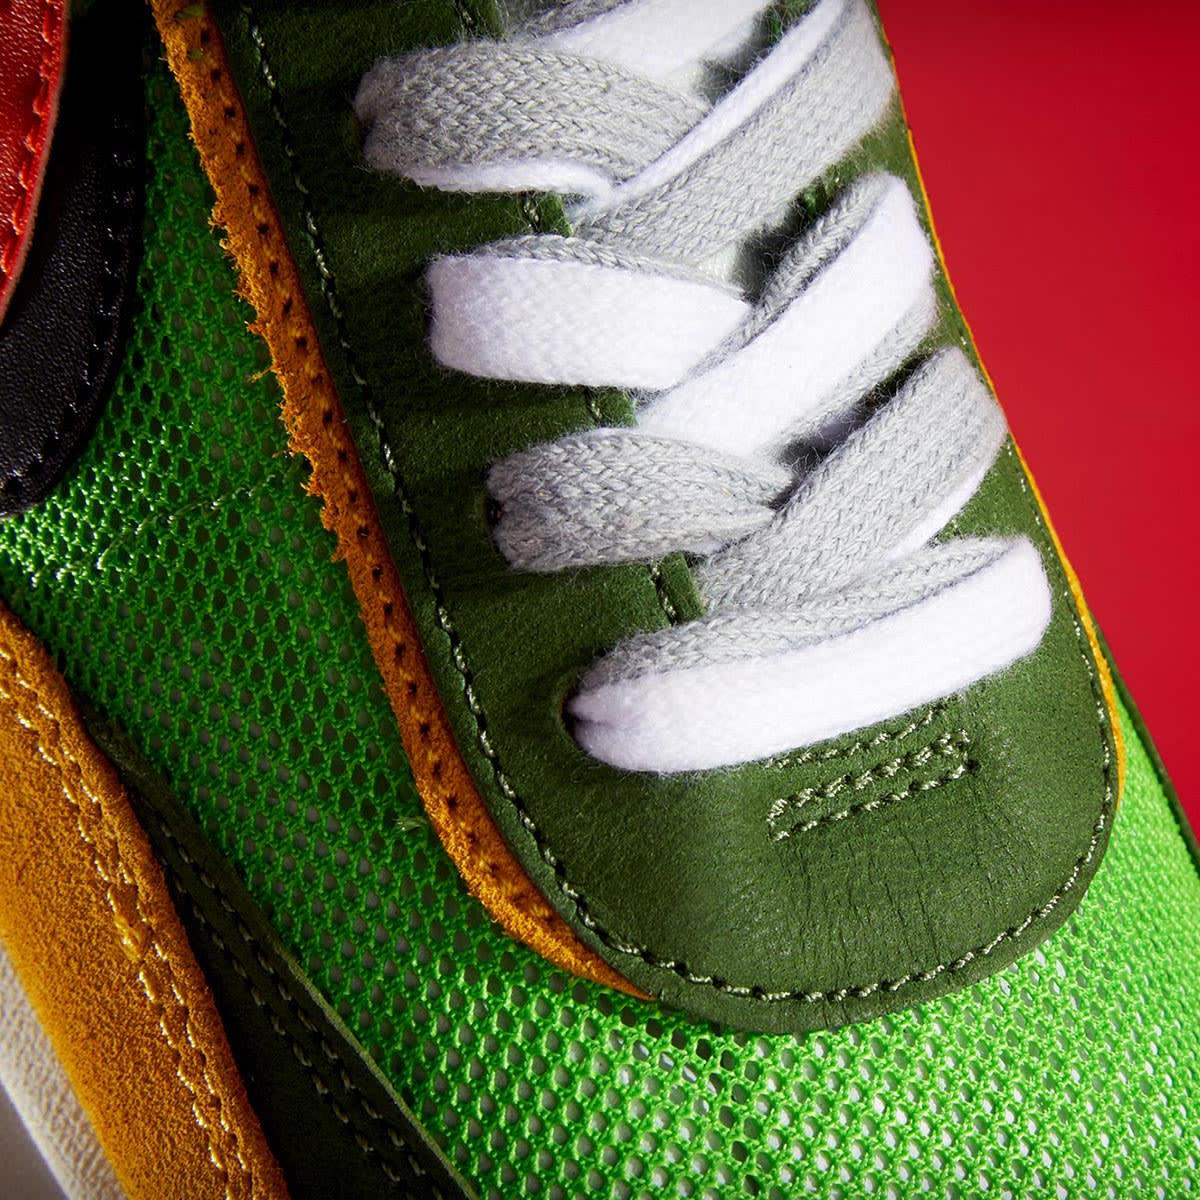 Nike x Sacai LDWaffle (Green Gusto & Safety Orange) | END. Launches